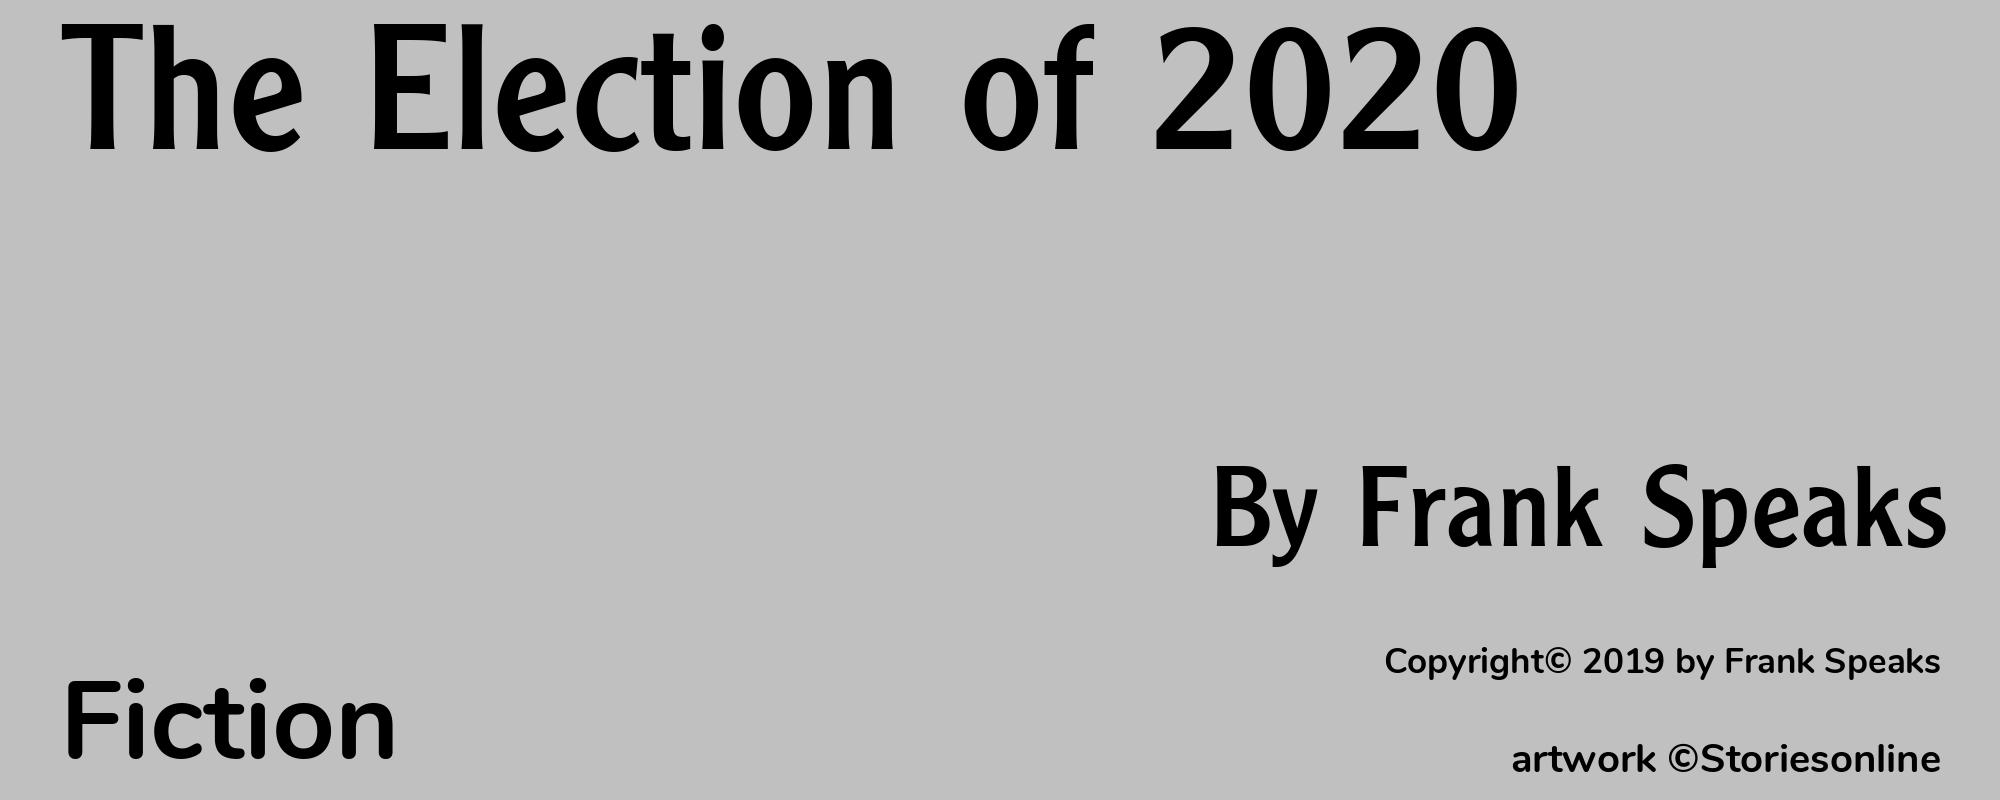 The Election of 2020 - Cover